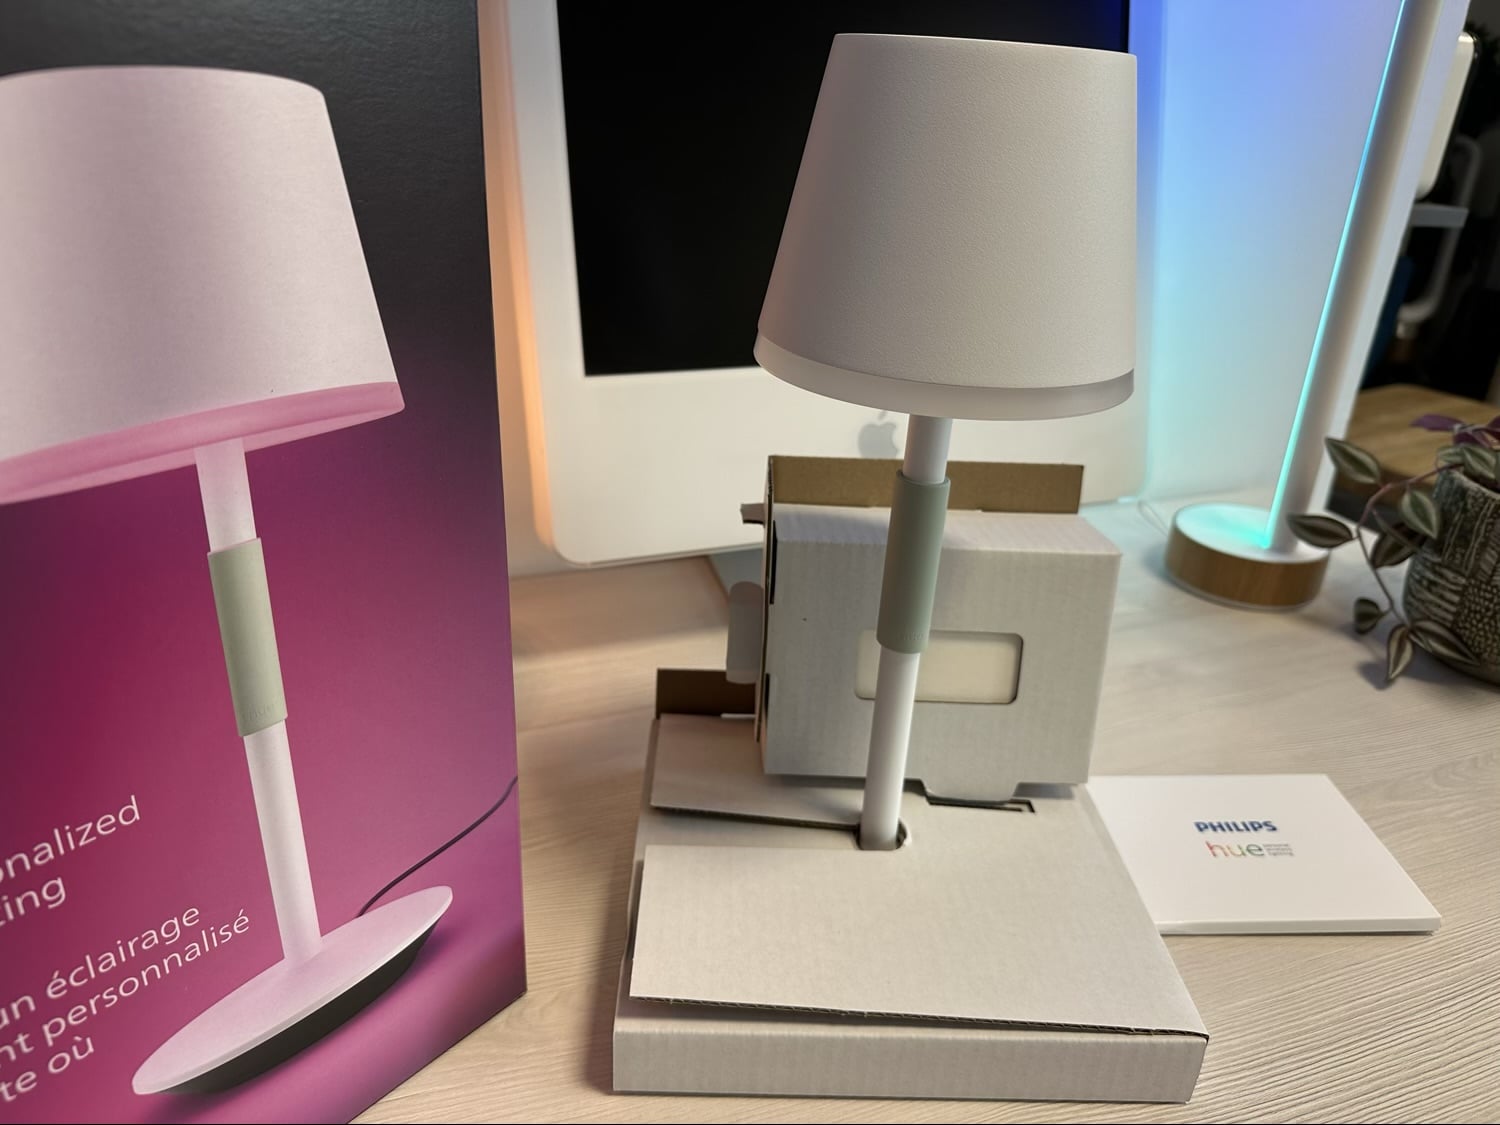 hier mosterd satire Unboxing the new Philips Hue Go portable table lamp - Hueblog.com